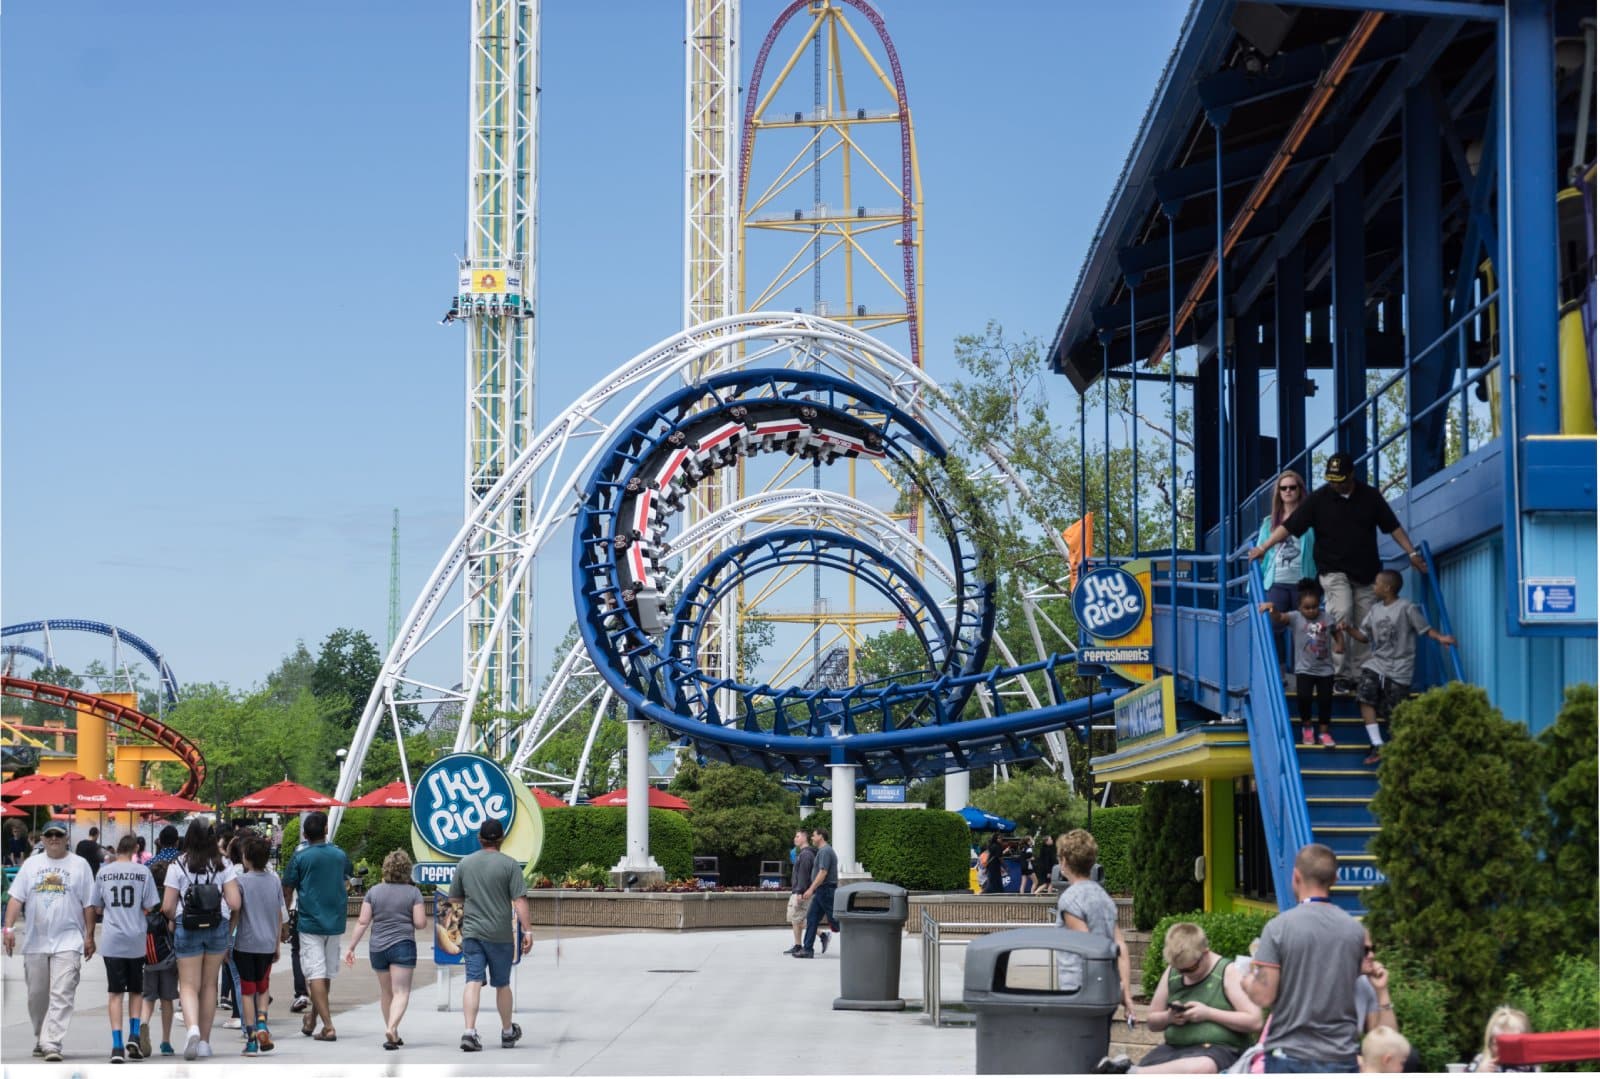 <p class="wp-caption-text">Image Credit: Shutterstock / David McGill 71</p>  <p><span>Home to some of the world’s best roller coasters, Ohioans love to brag about Cedar Point.</span></p>